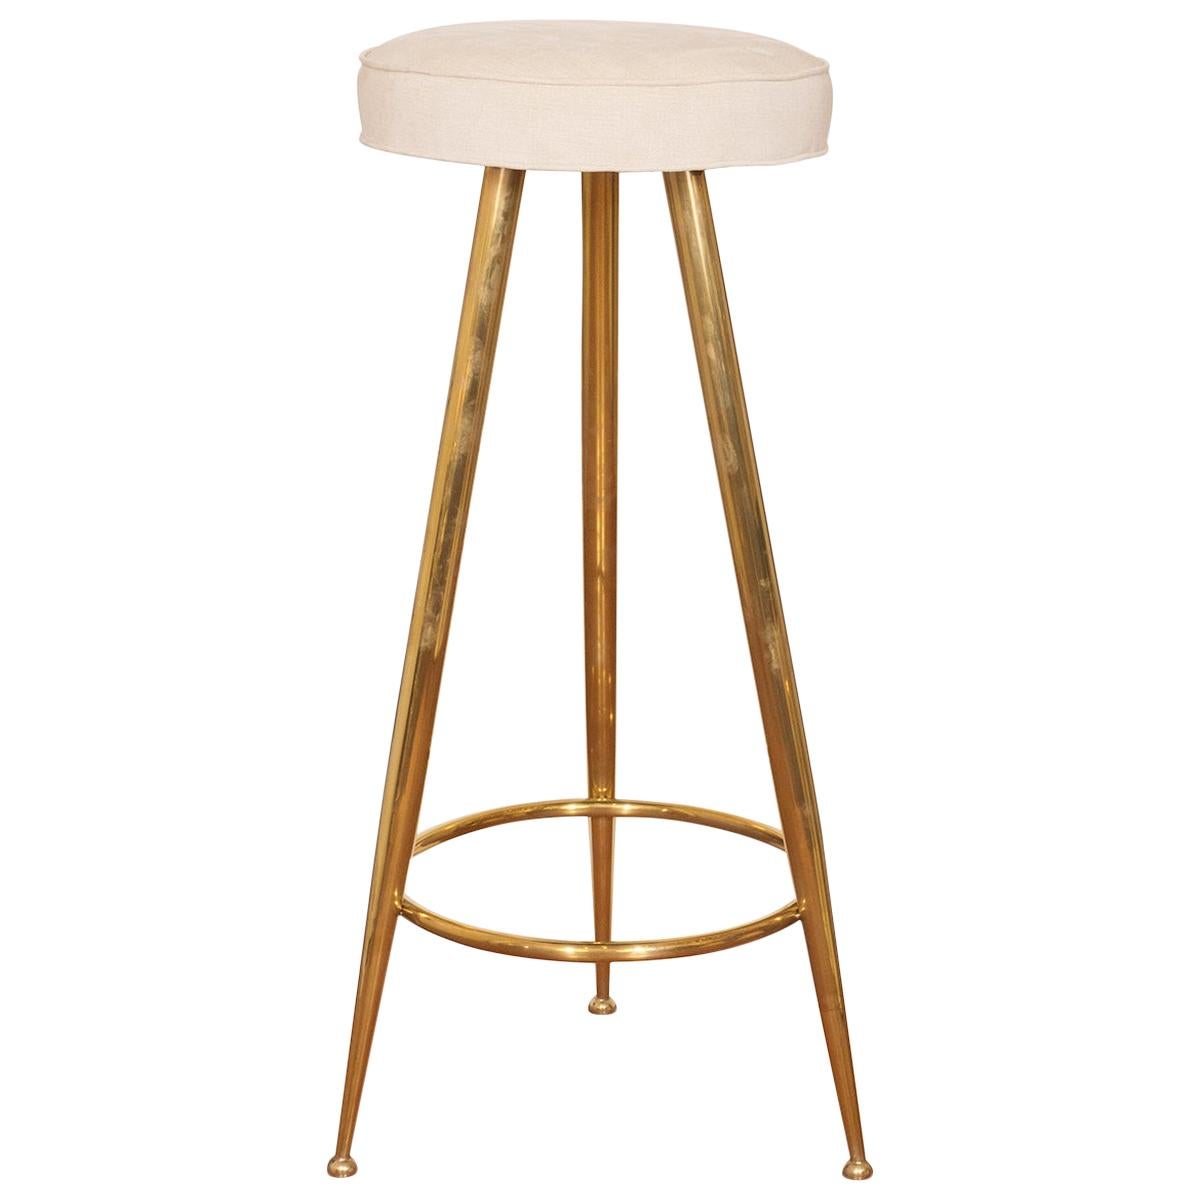 Upholstered Brass Tripod Stools For Sale